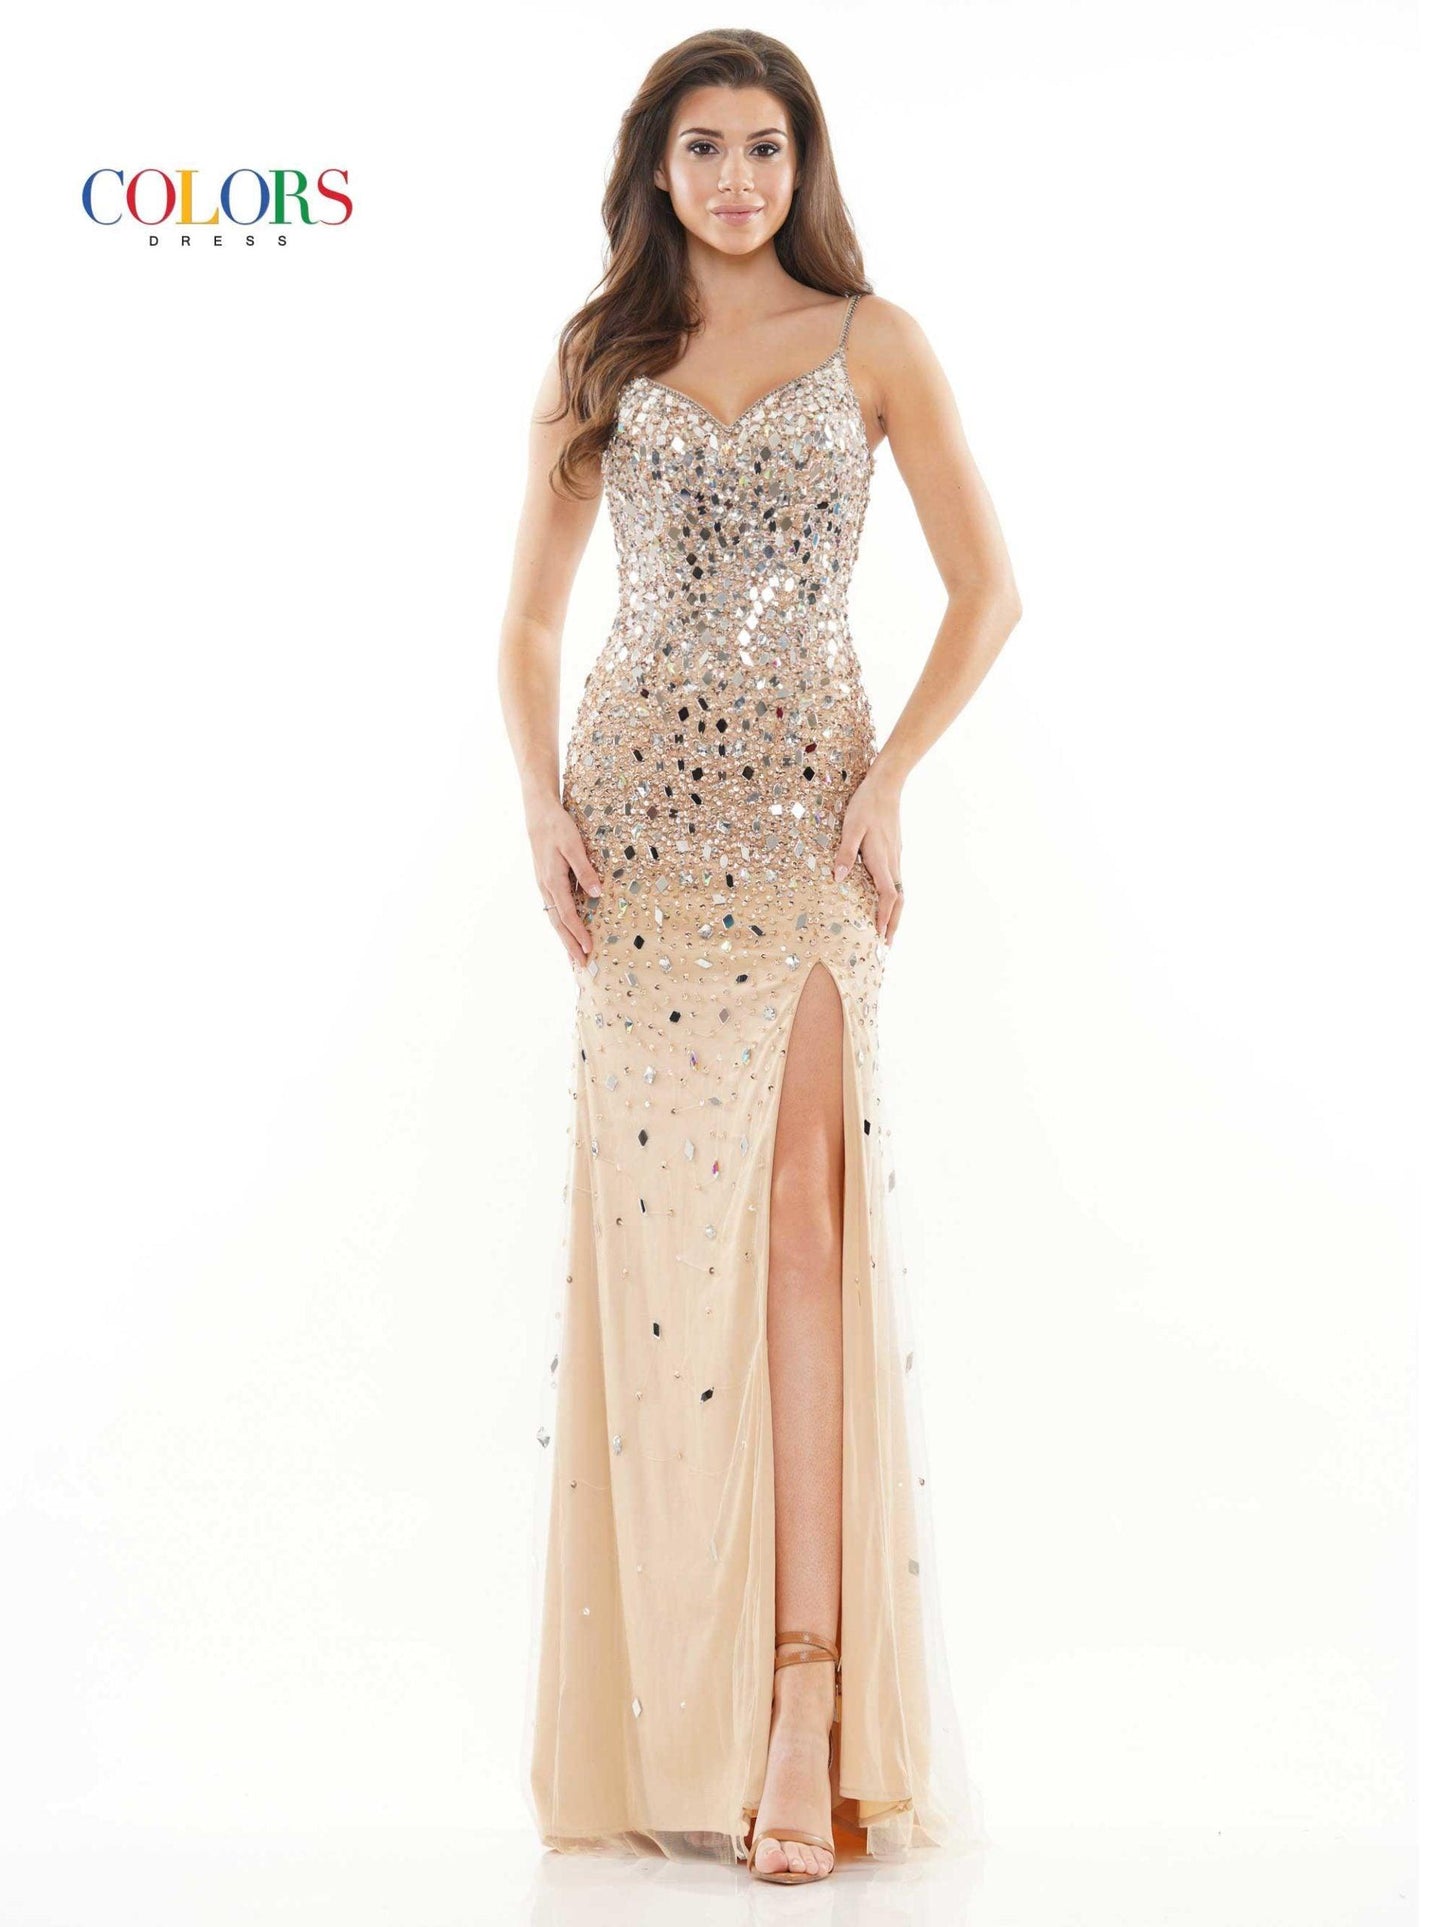 Colors Prom Long Spaghetti Strap Formal Dress 2724 - The Dress Outlet